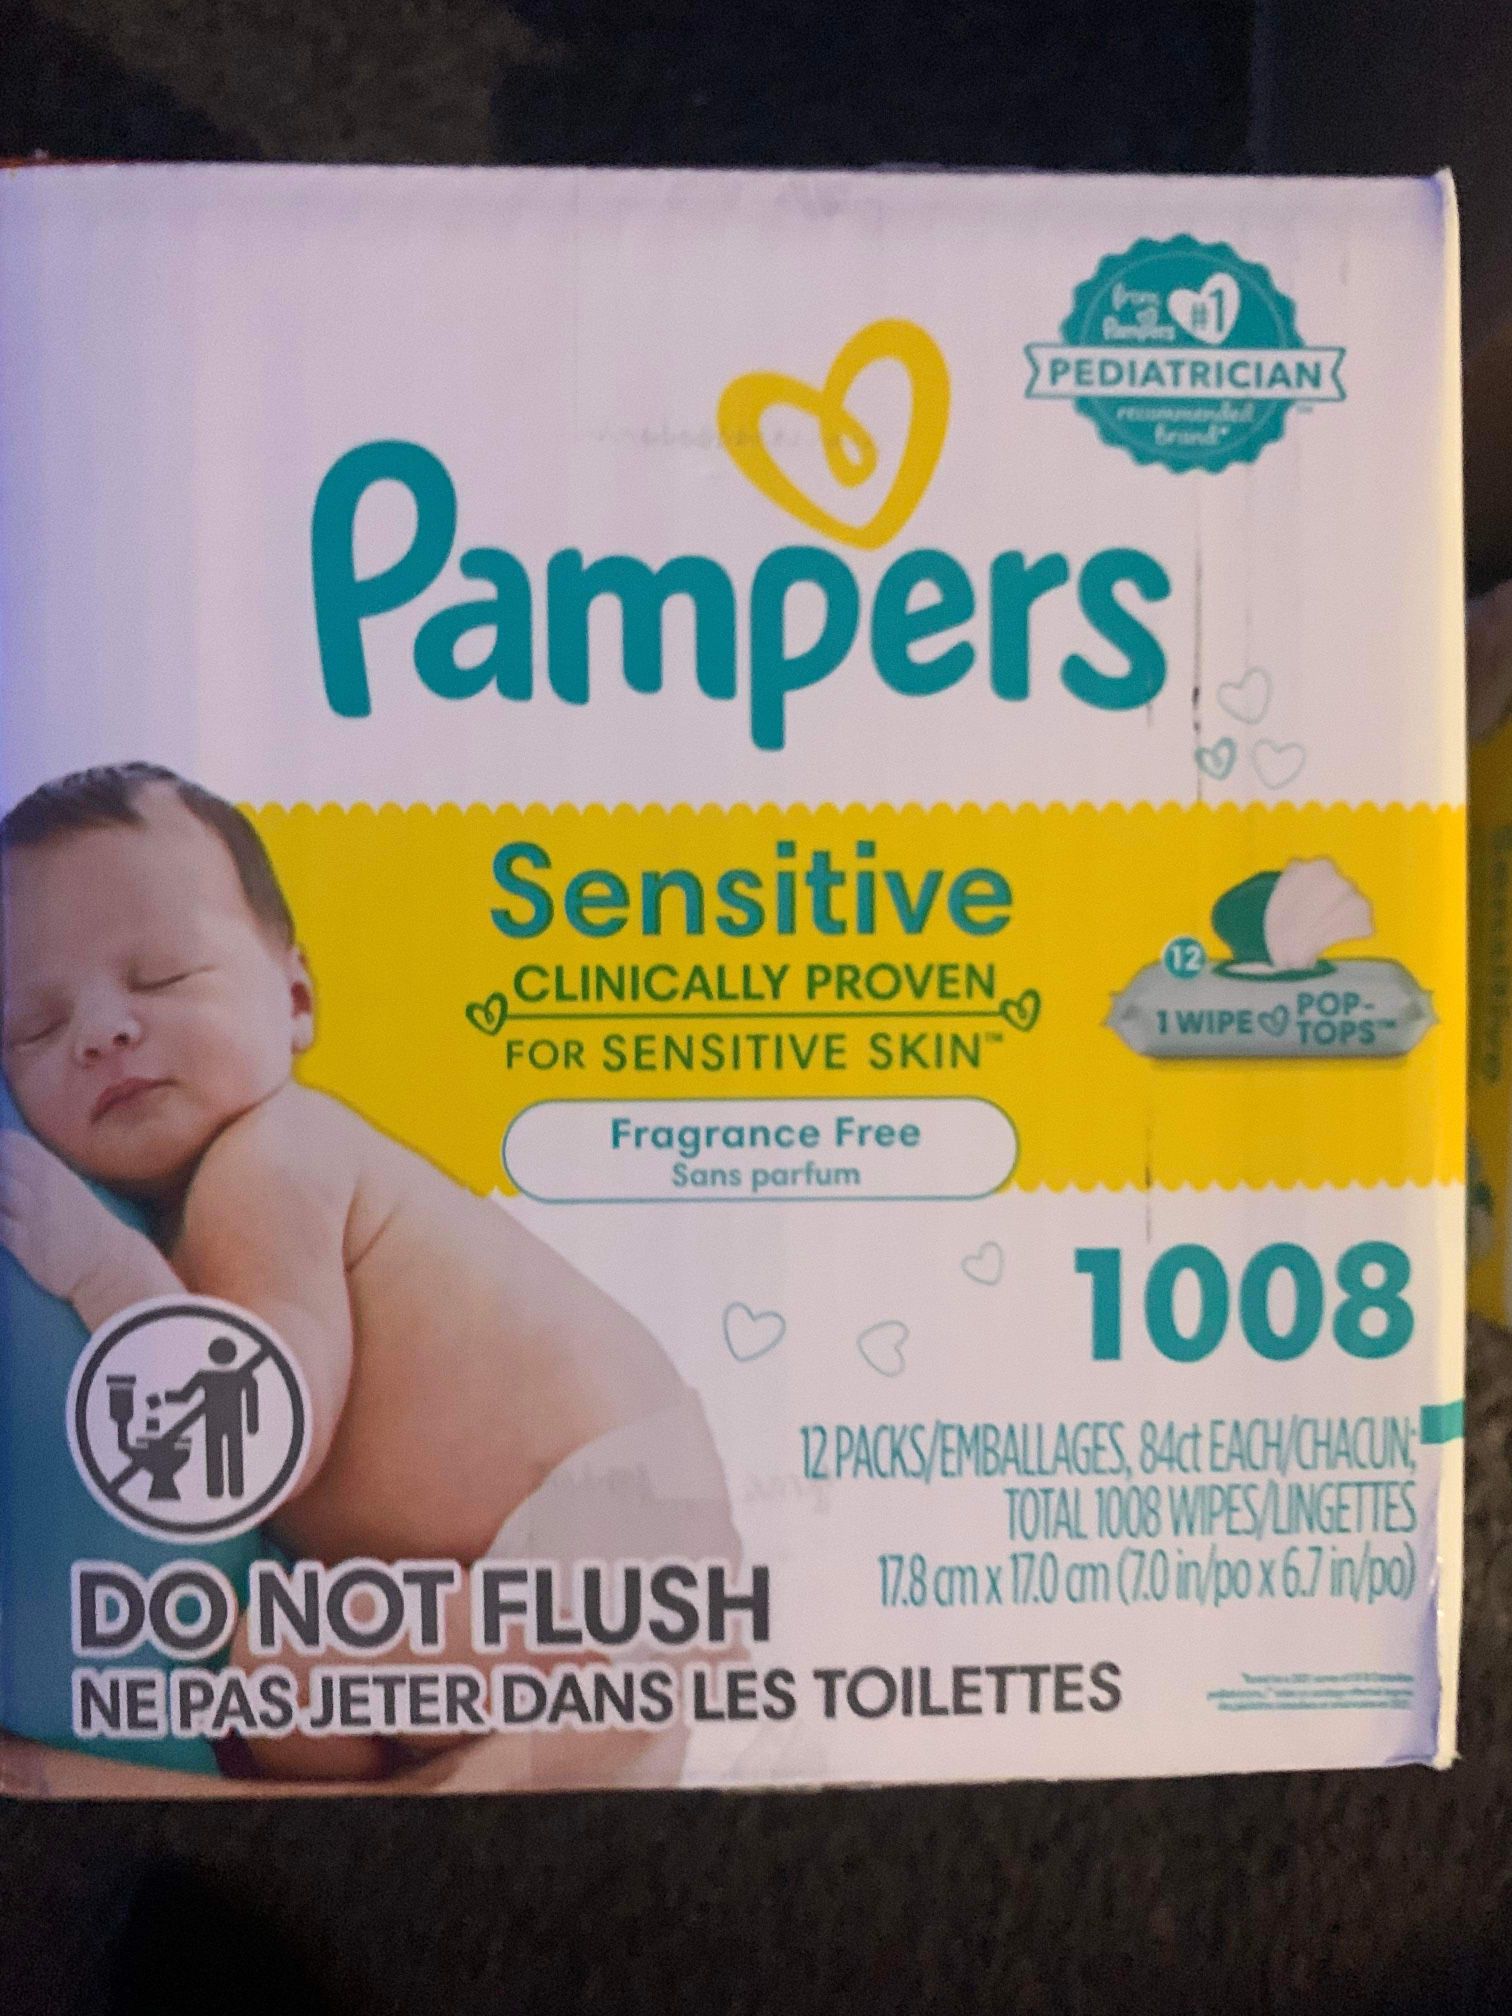 Pampers Sensitive Wipes - 1008 Count 